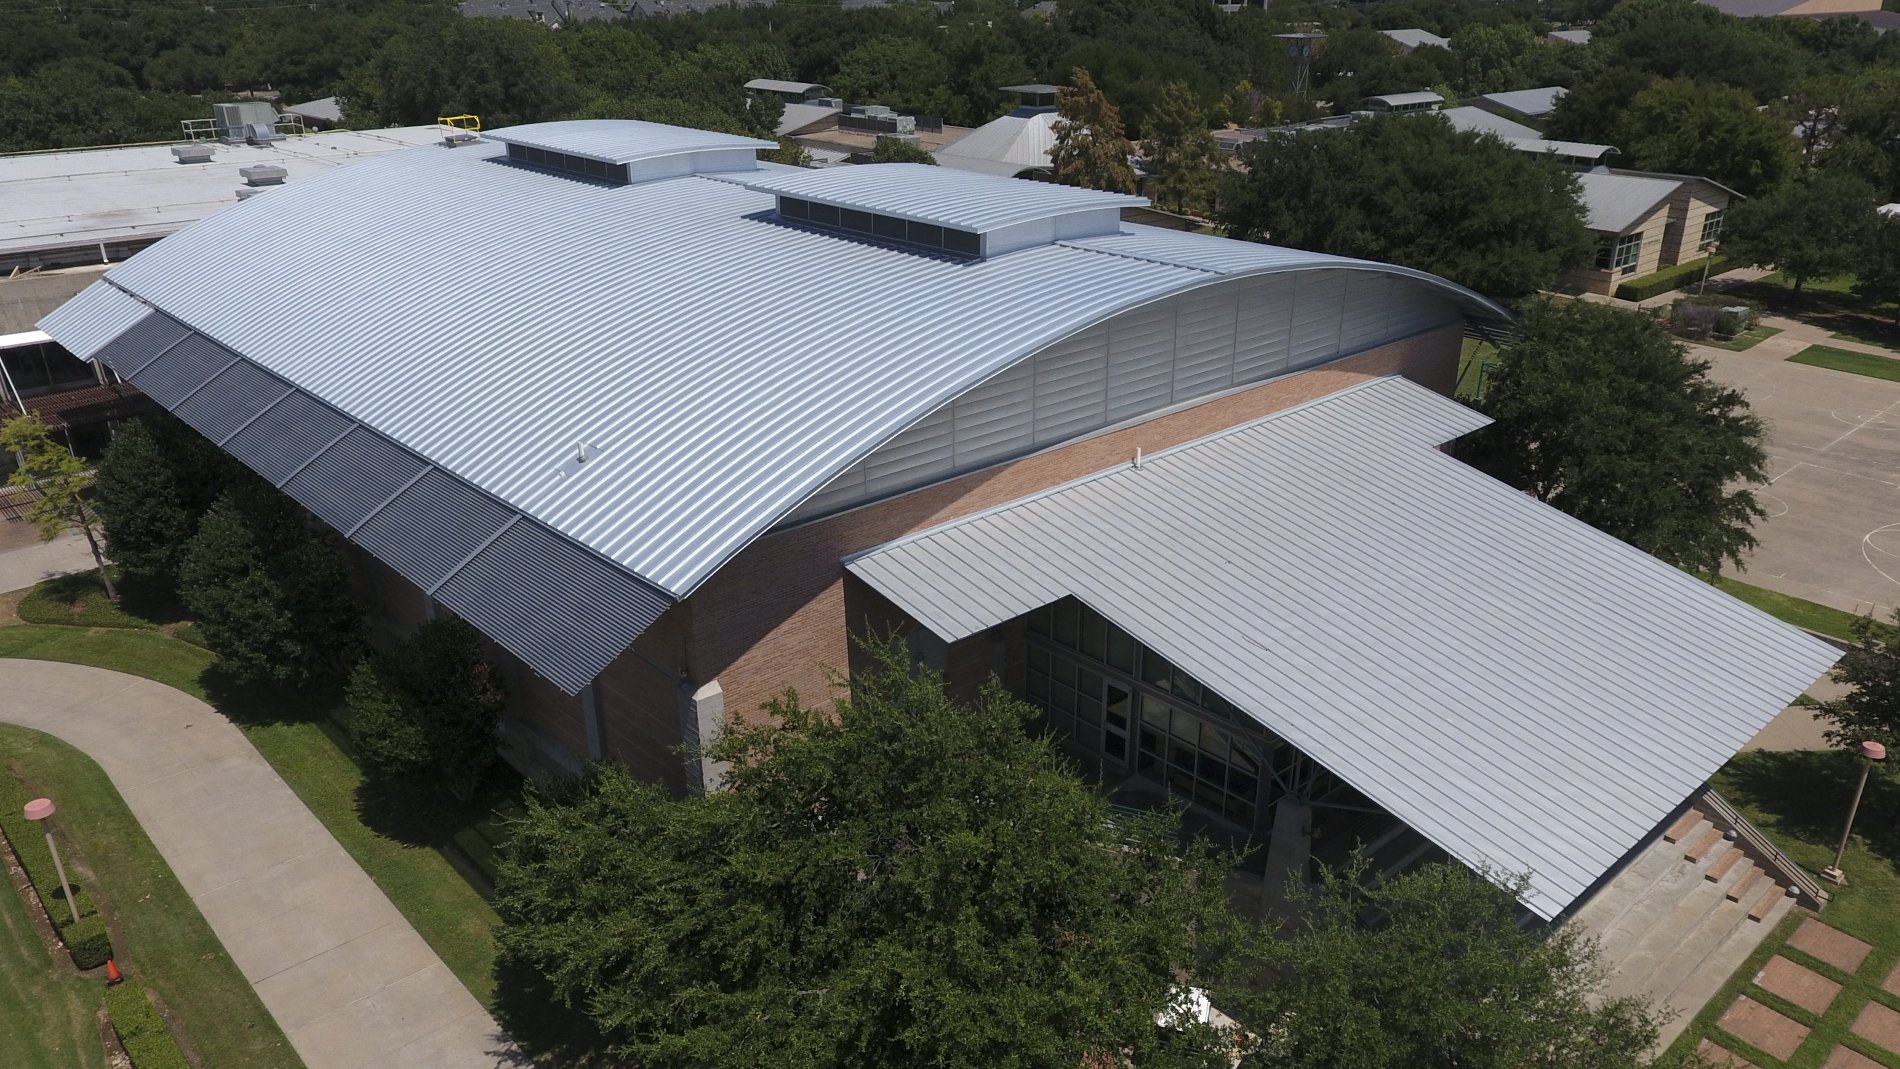 Leaking School Roof Problem Solved with Symmetrical Standing Seam Roofing System